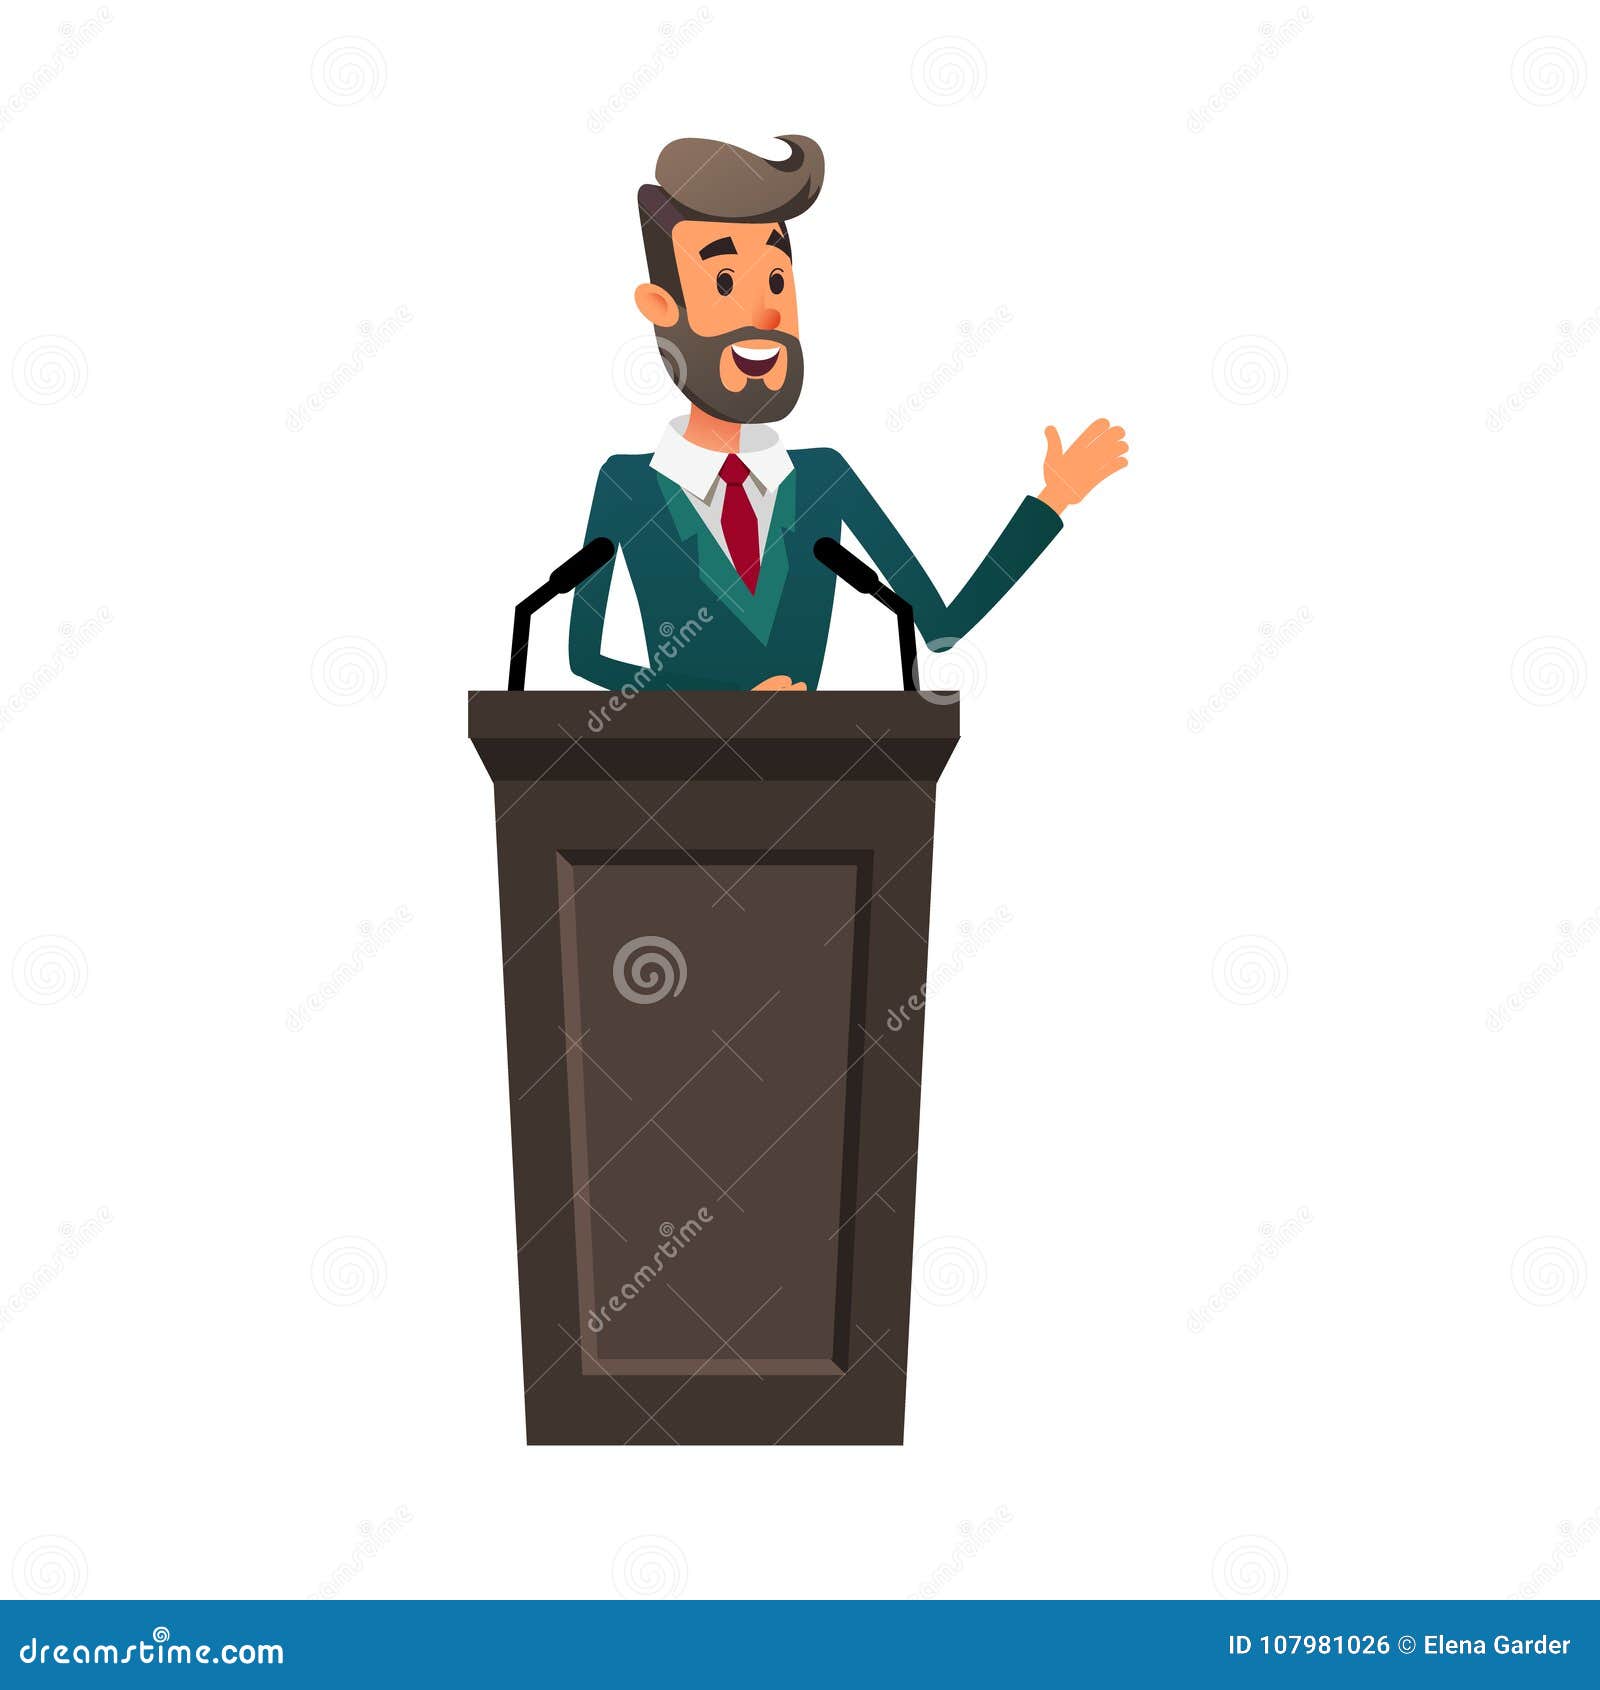 the lecturer stands behind the rostrum. the speaker lectures and gestures. a young politician speaks to the public.